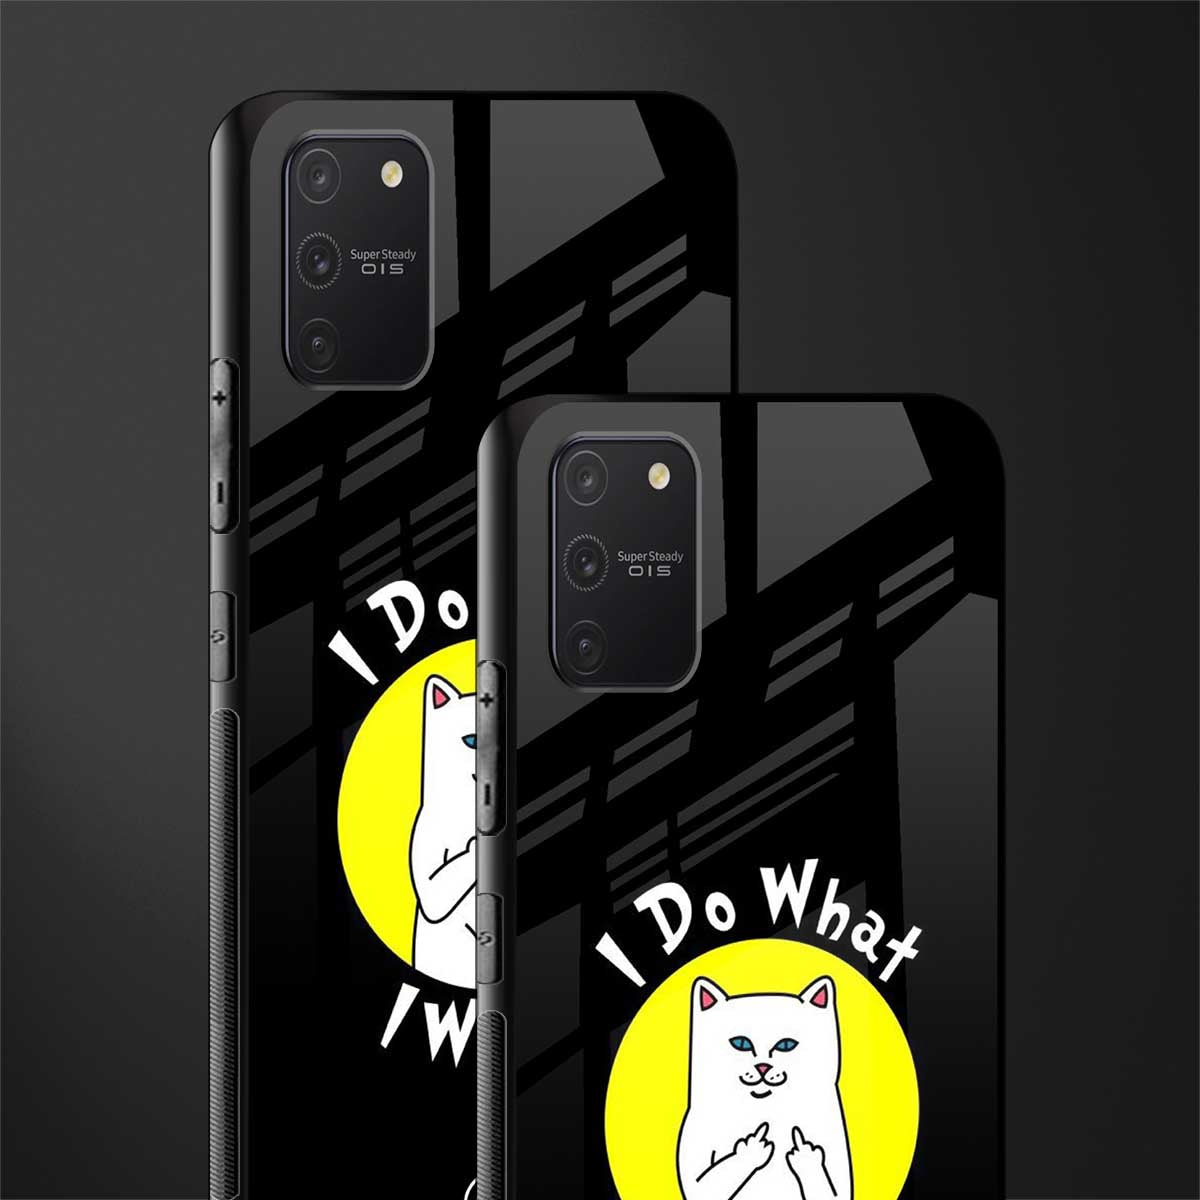 i do what i want glass case for samsung galaxy s10 lite